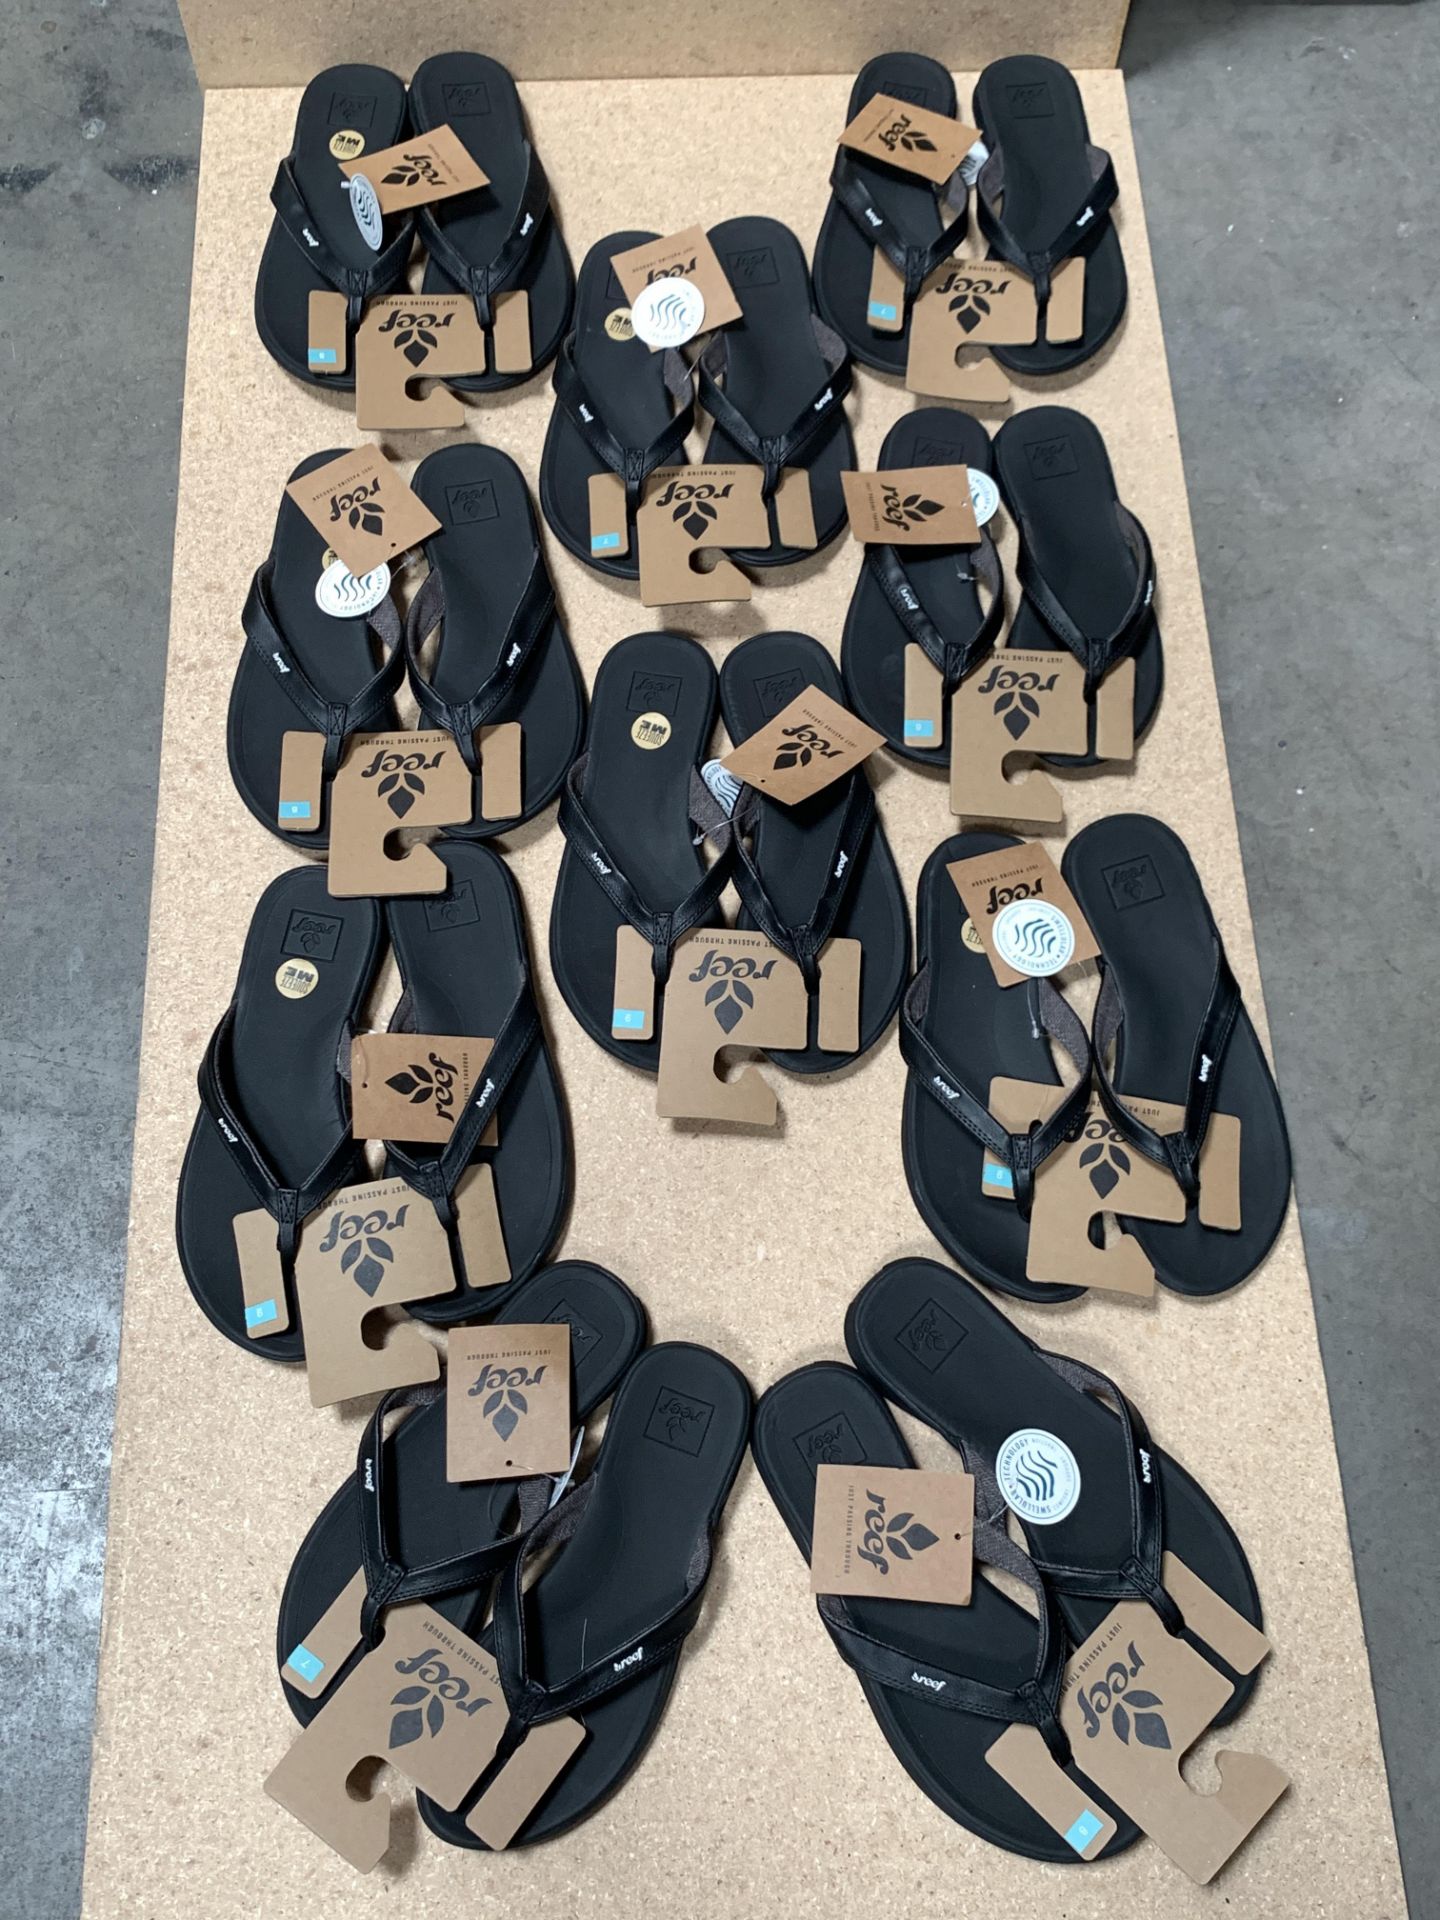 10 REEF Flip Flop Sandals, New w. Tags, Various Sizes, Rover Catch Black (Retail Value $550)